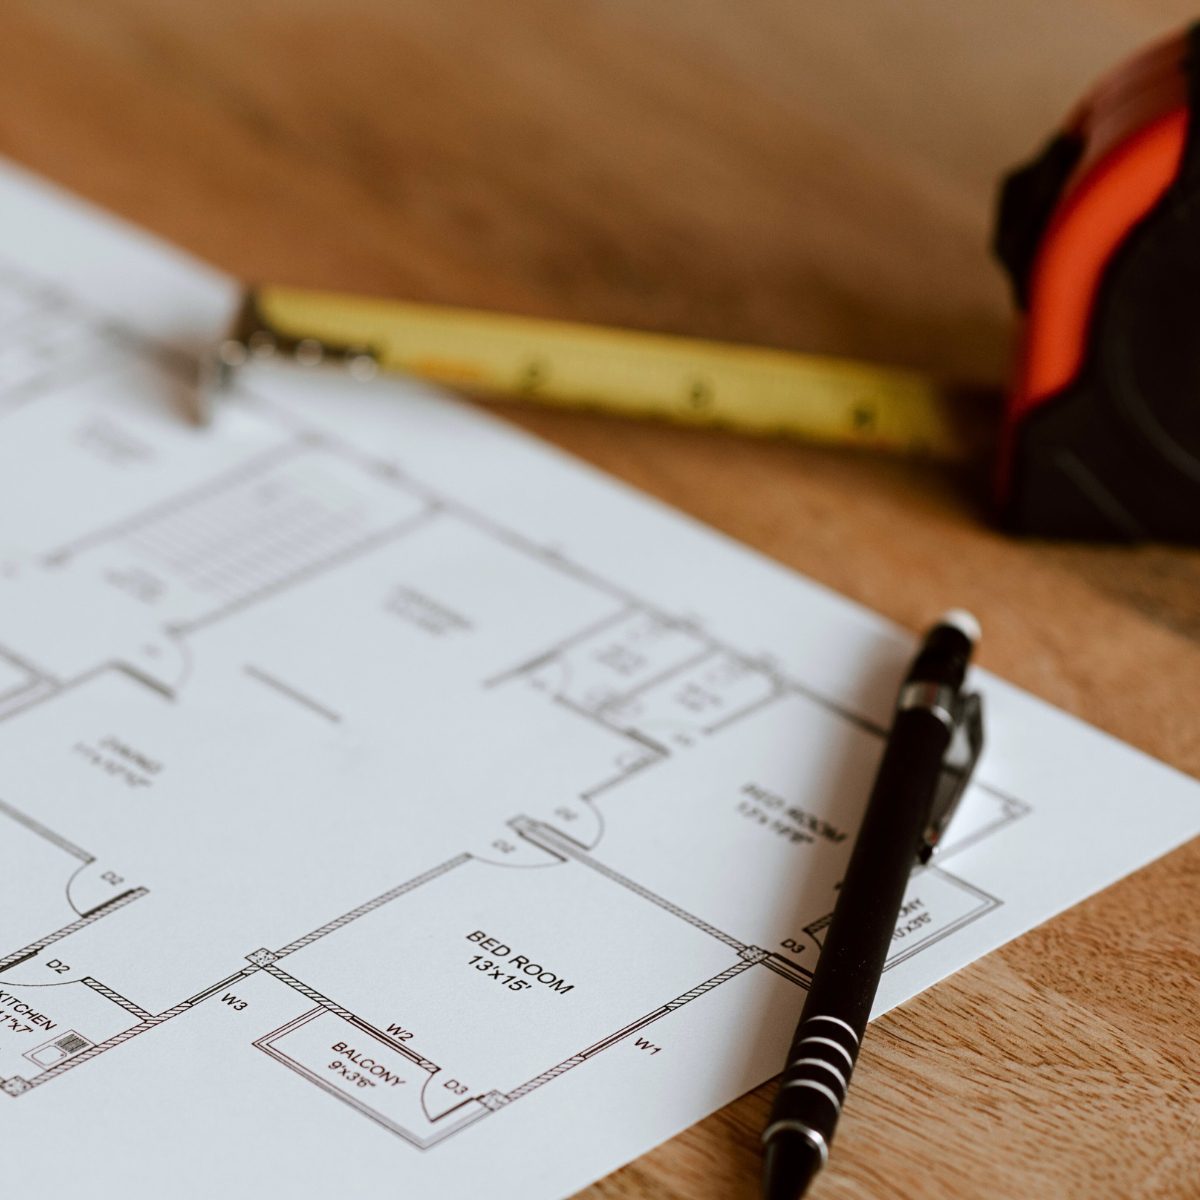 Everything you need to know about the home building process